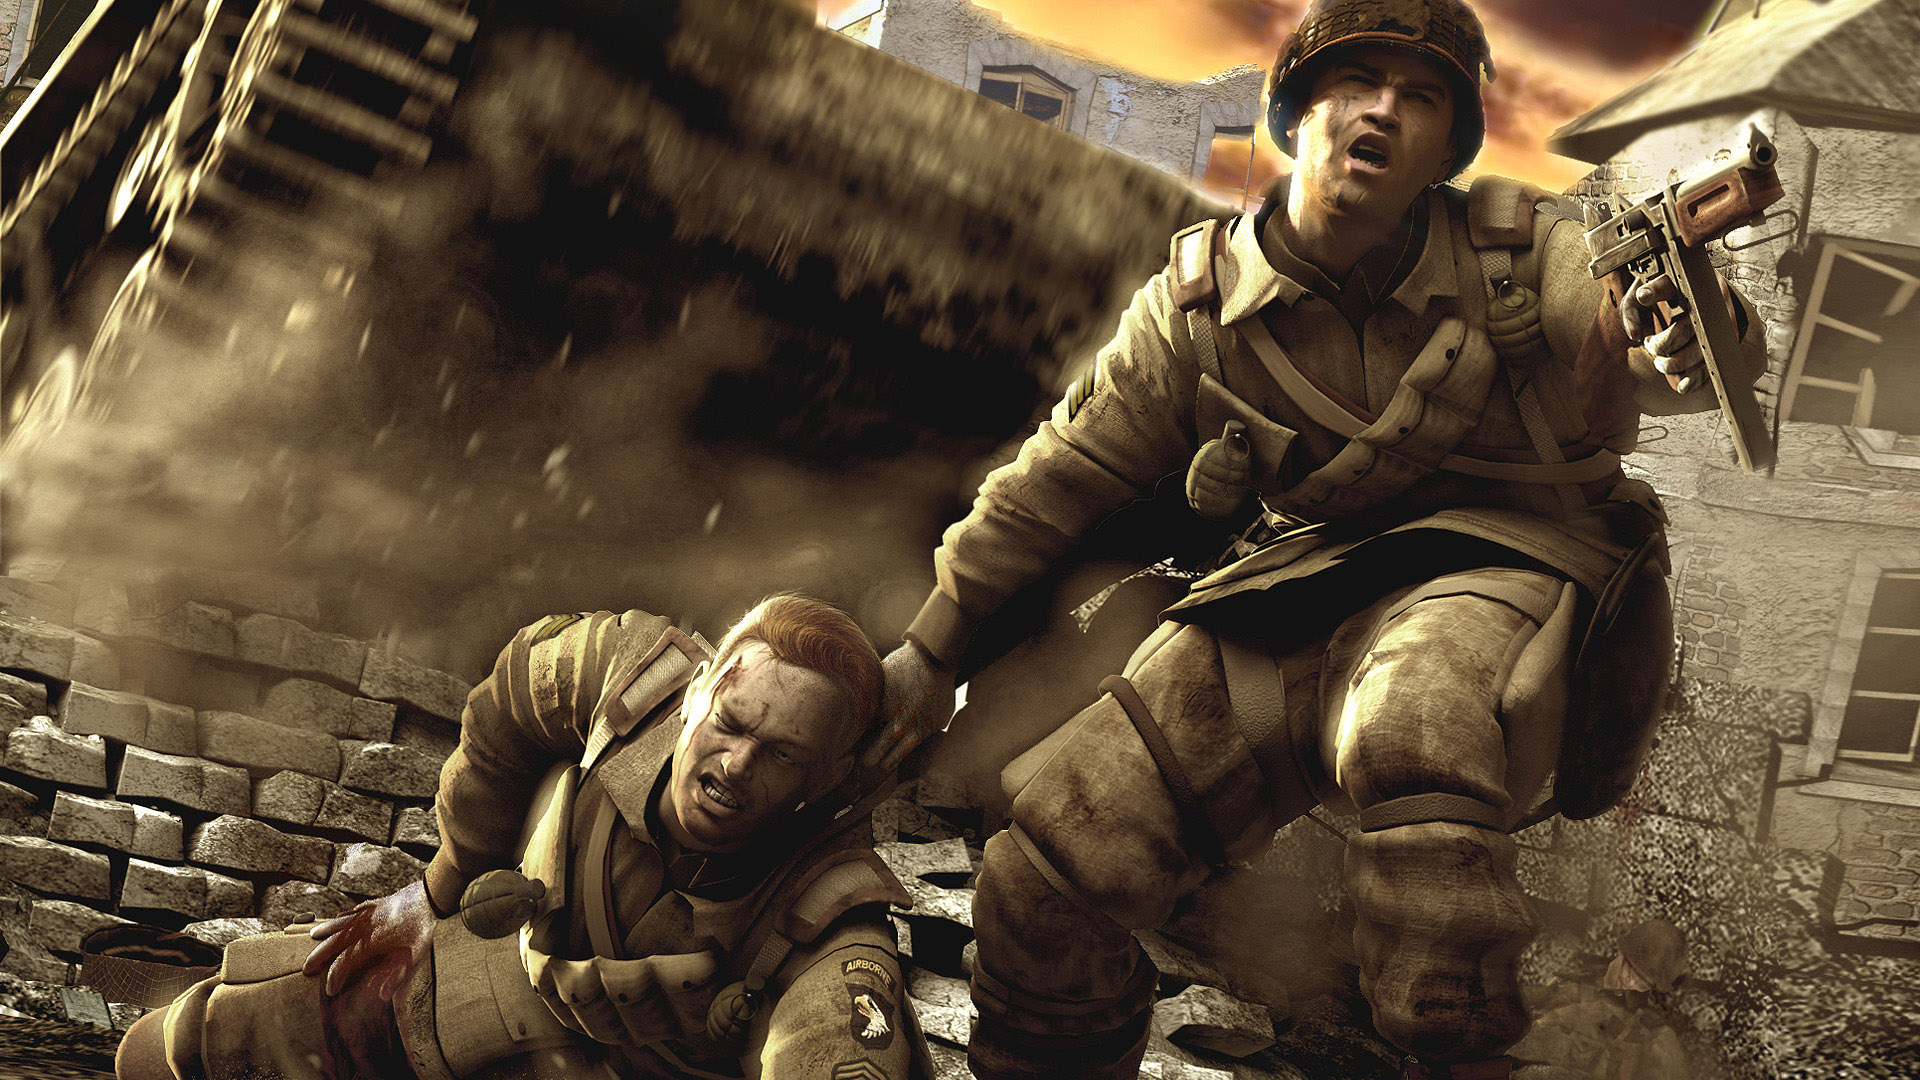 guerra wallpaper,action adventure game,pc game,soldier,games,action film